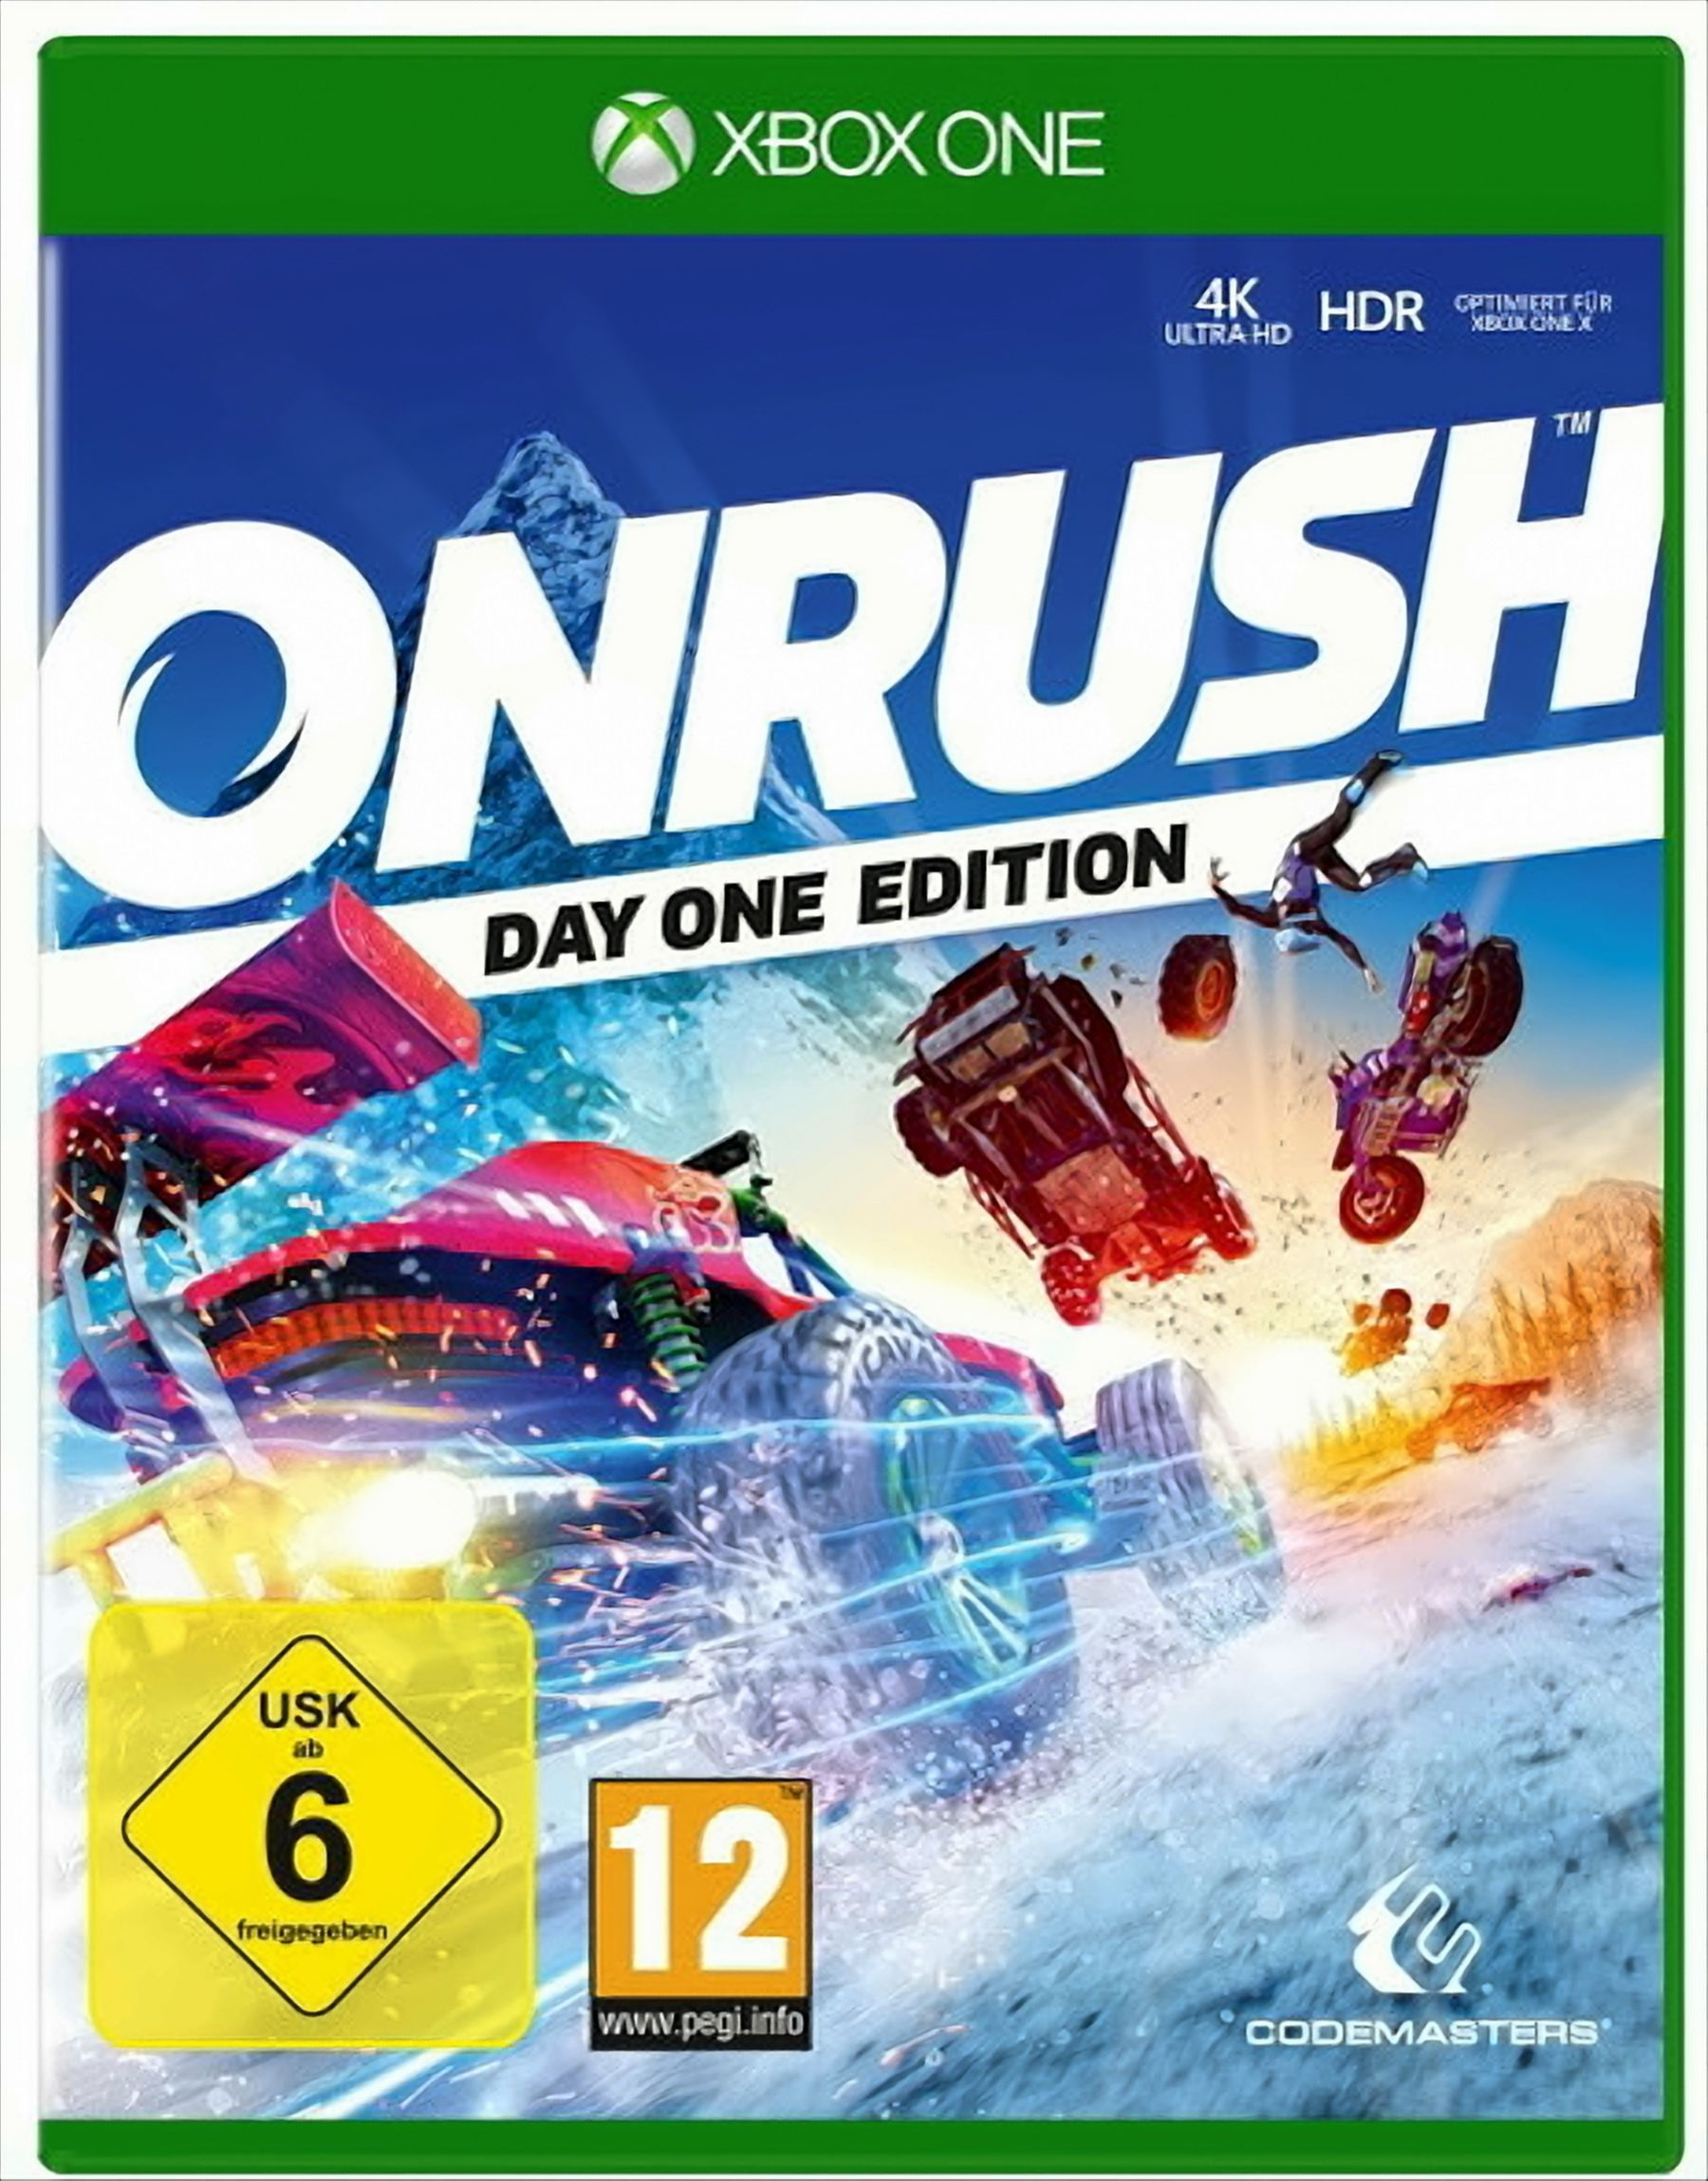 Edition - - One One] [Xbox Day Onrush